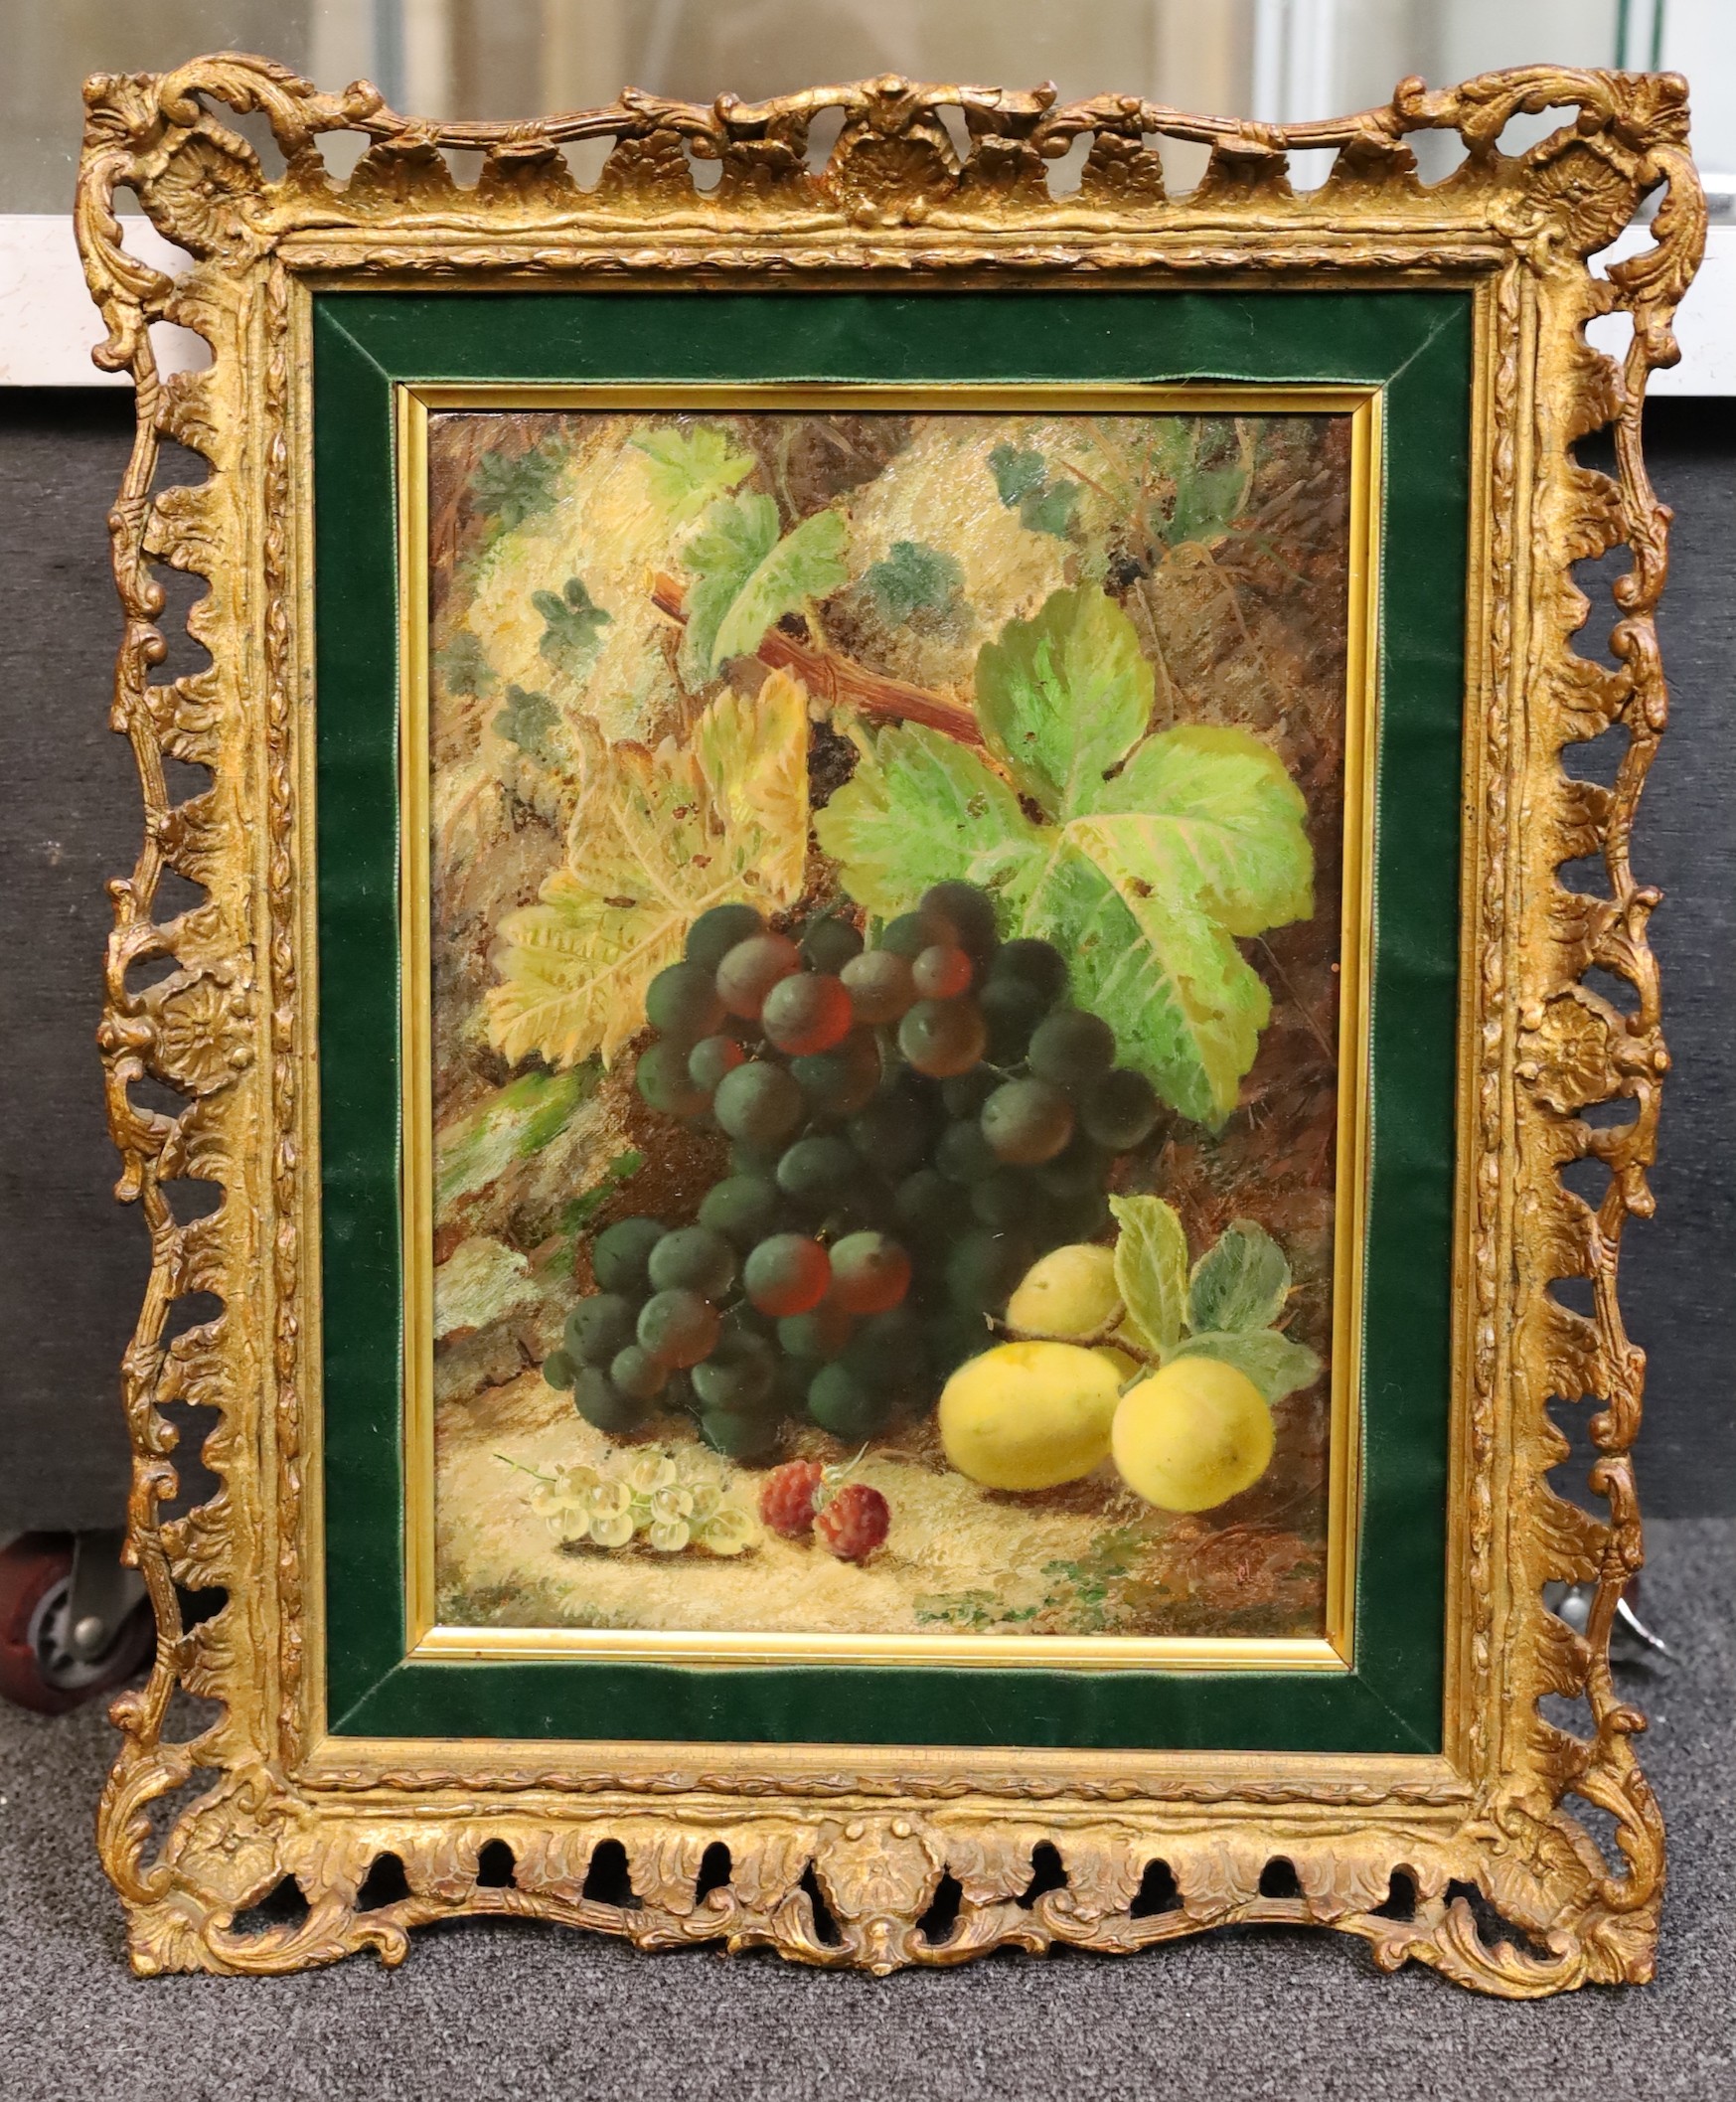 Oliver Clare (British, 1853-1927), Still life of grapes, white currants, raspberries and plums, oil on canvas, 30 x 22cm